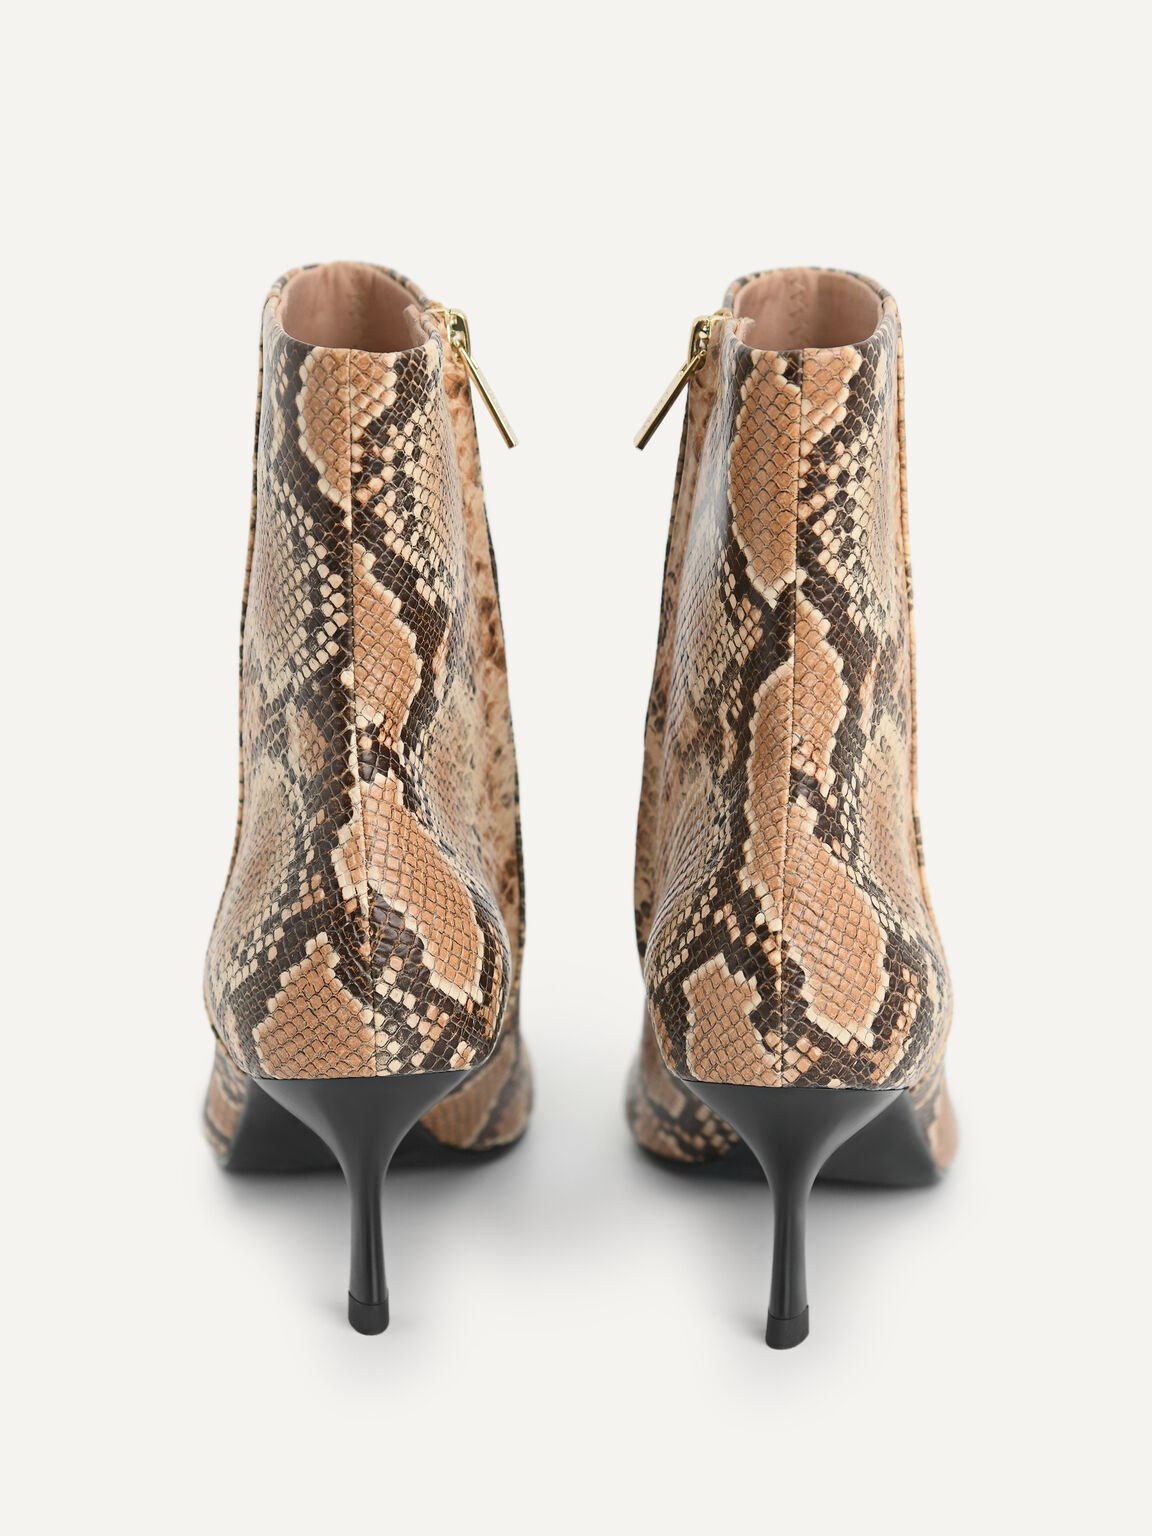 Snake-Effect Square-Toe Heeled Ankle Boots, Multi